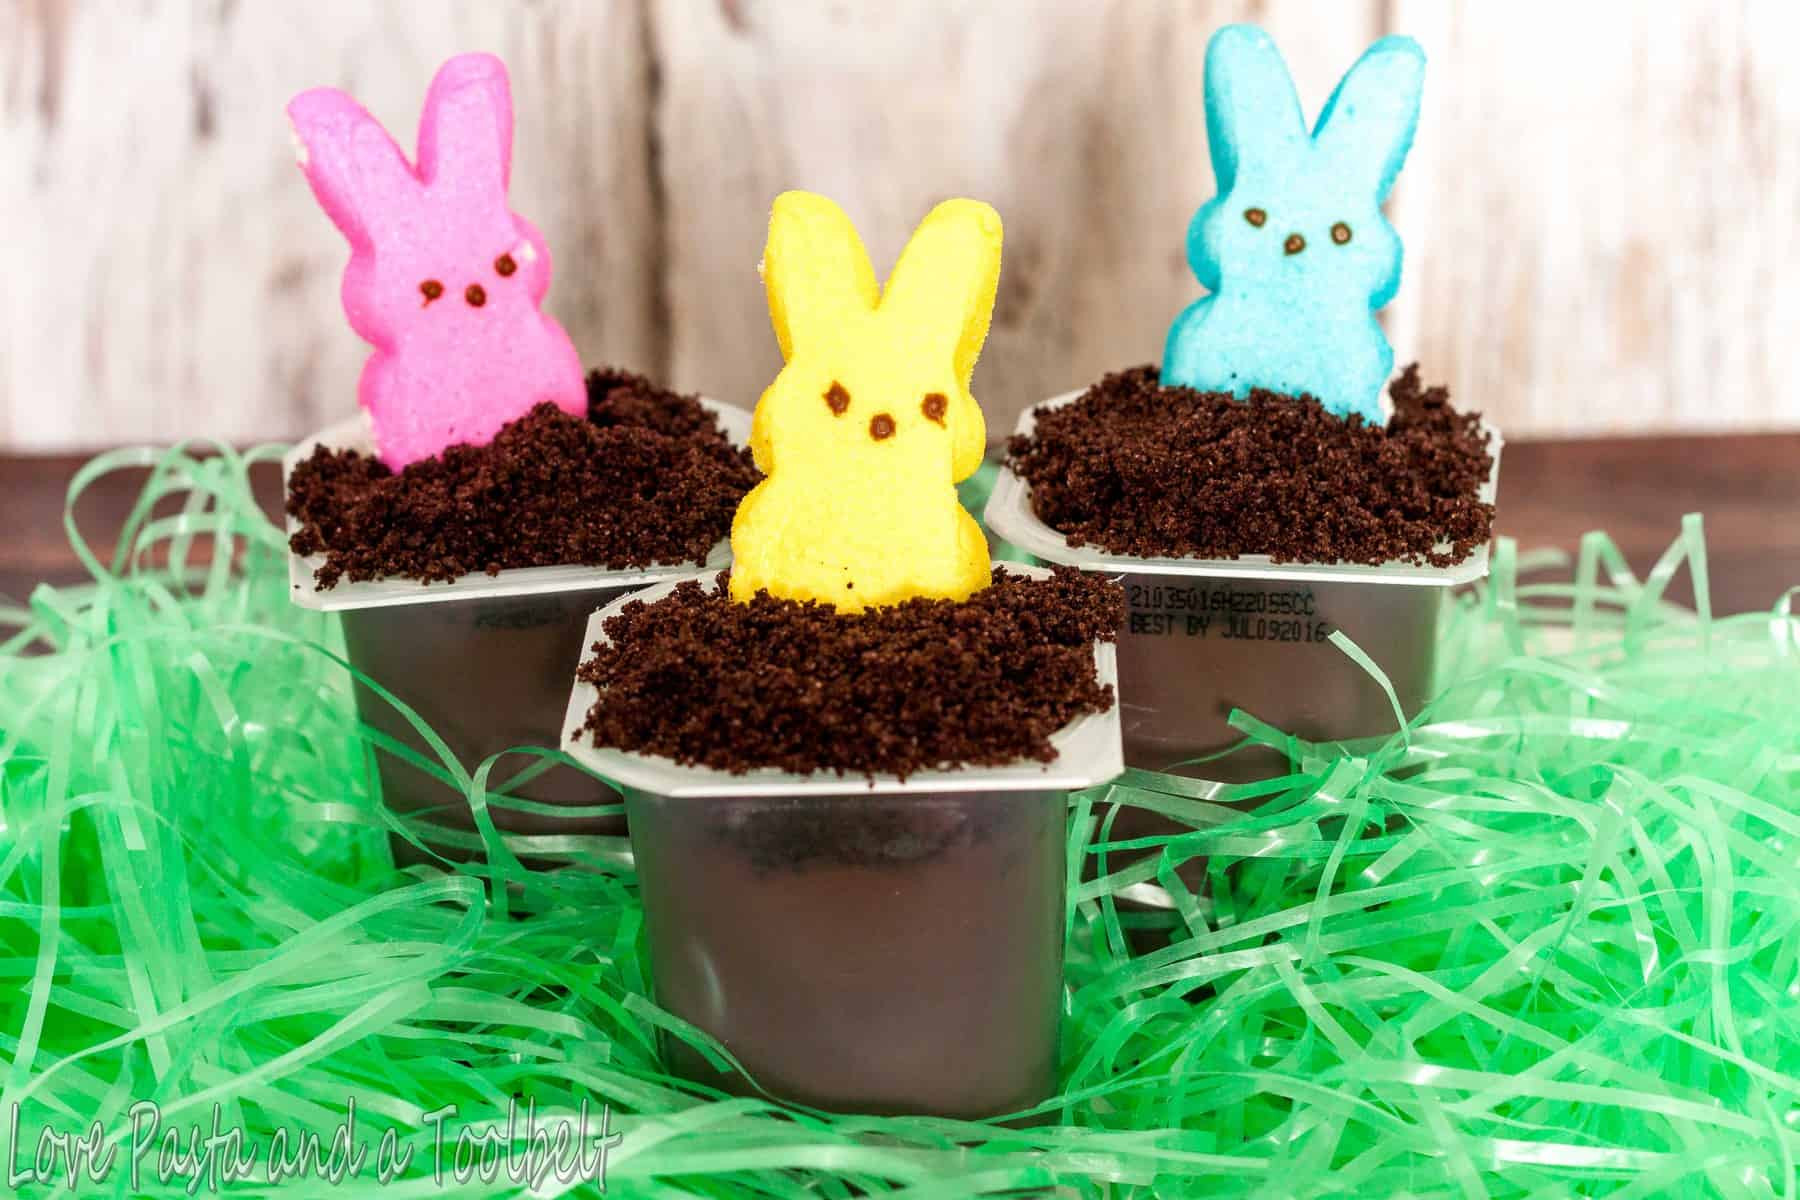 Easter Pudding Desserts
 Easter Bunny Hole Pudding Cups Love Pasta and a Tool Belt